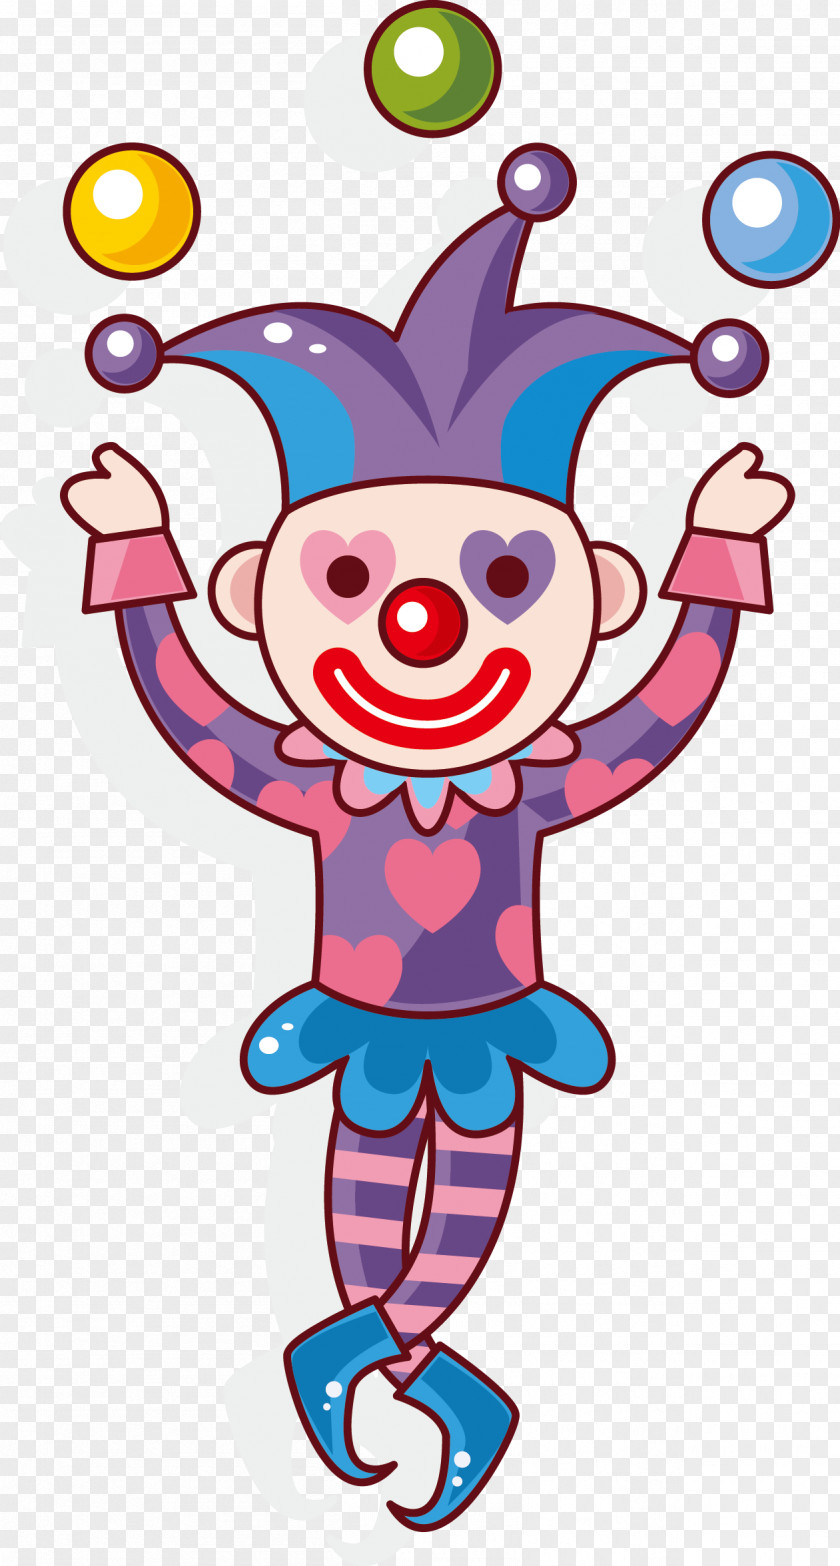 The Clown Throws Stunt Performer Circus Cartoon Illustration PNG